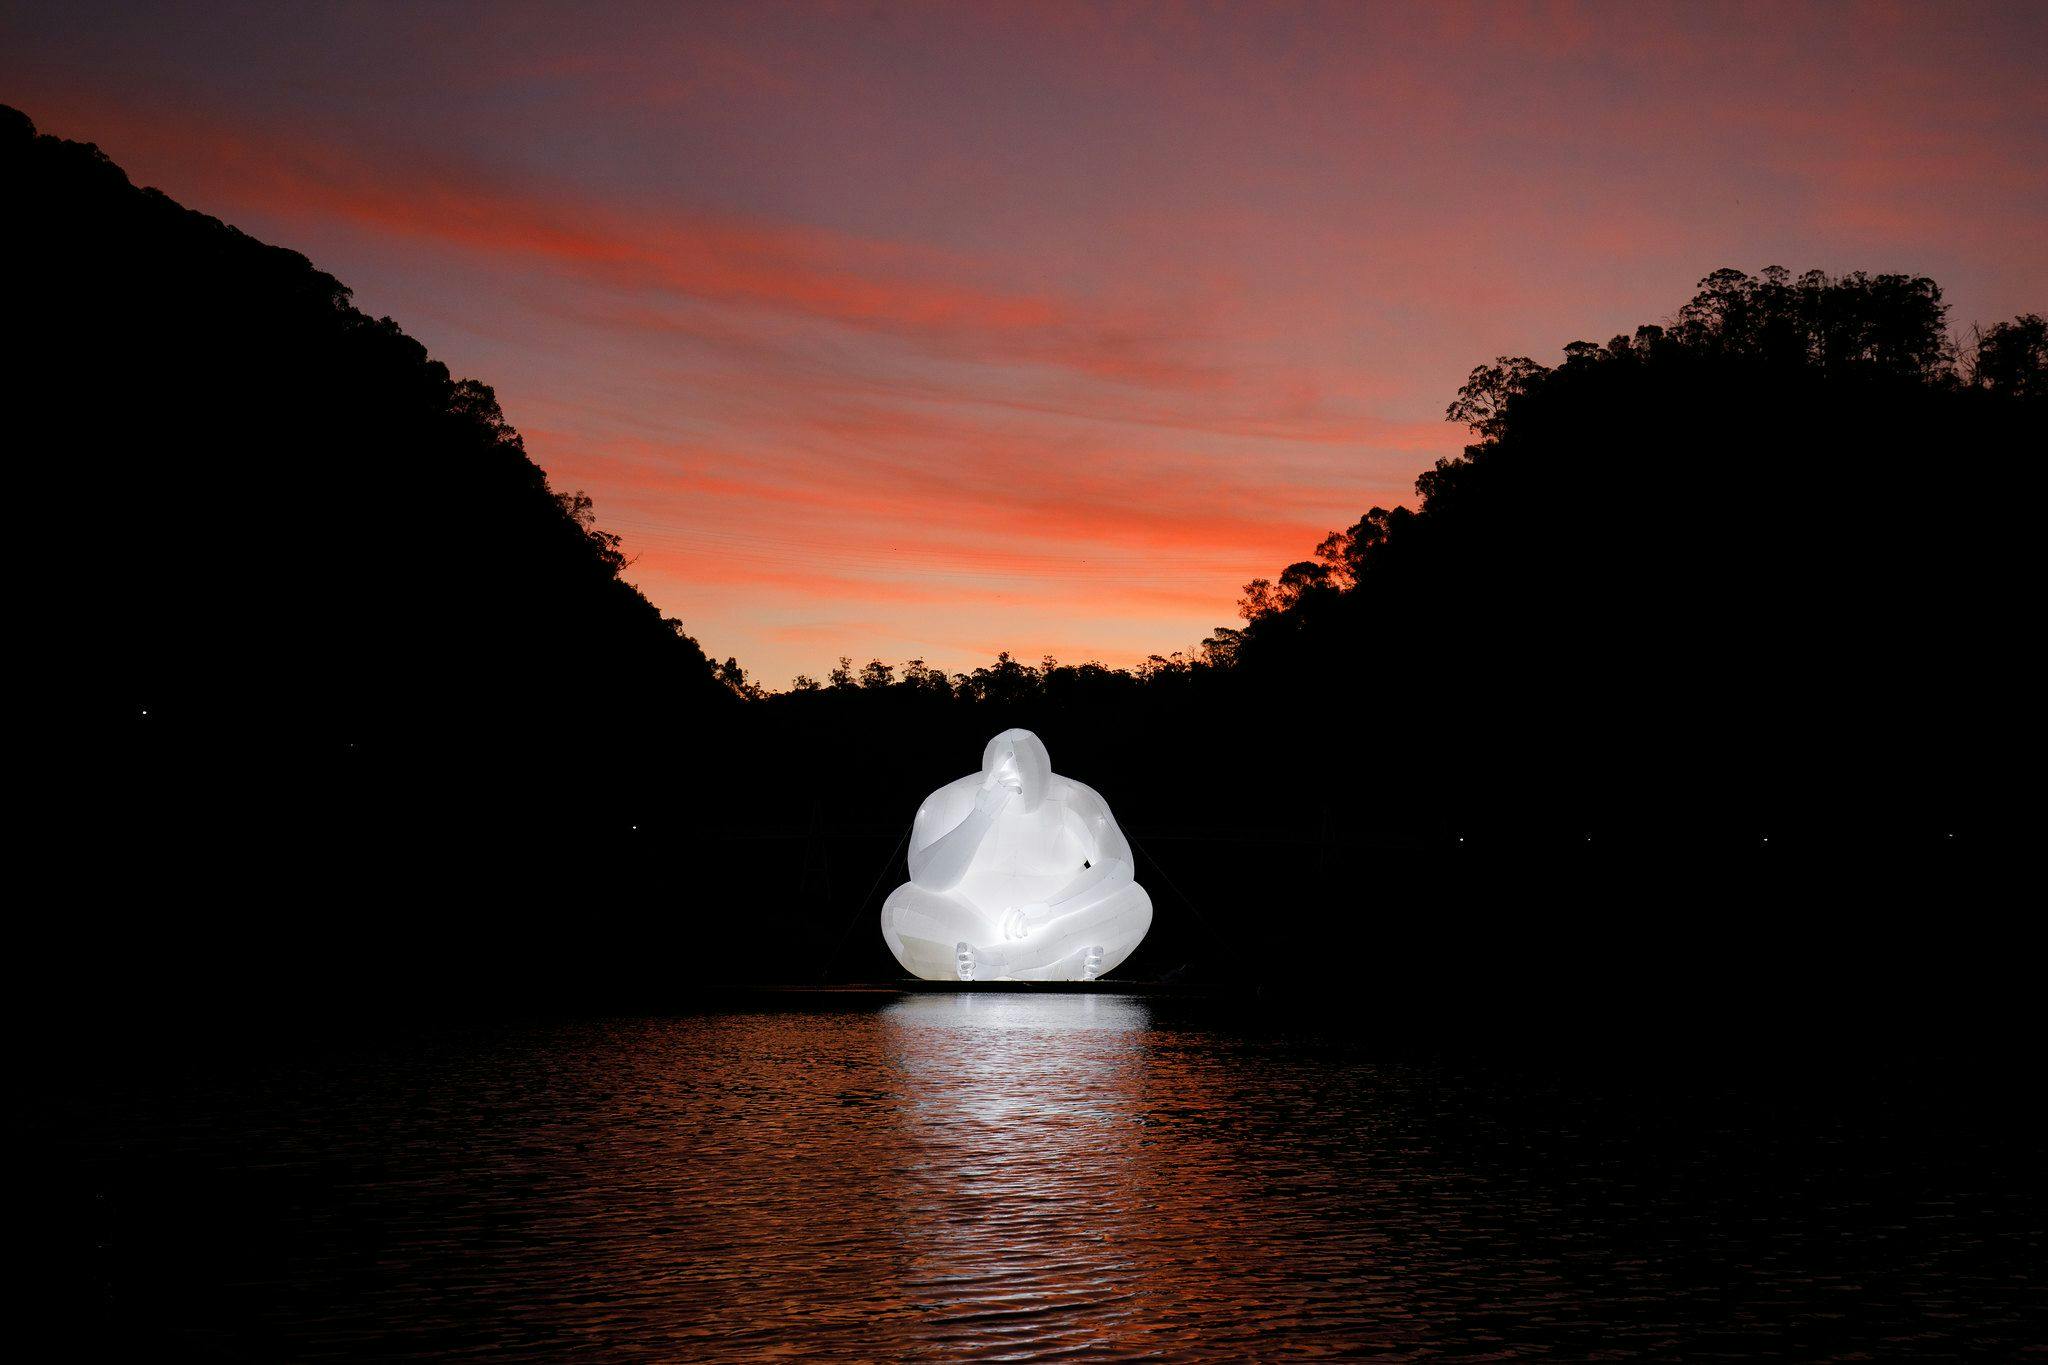 Sculpture of inflatable person head in hand on water at sunset.